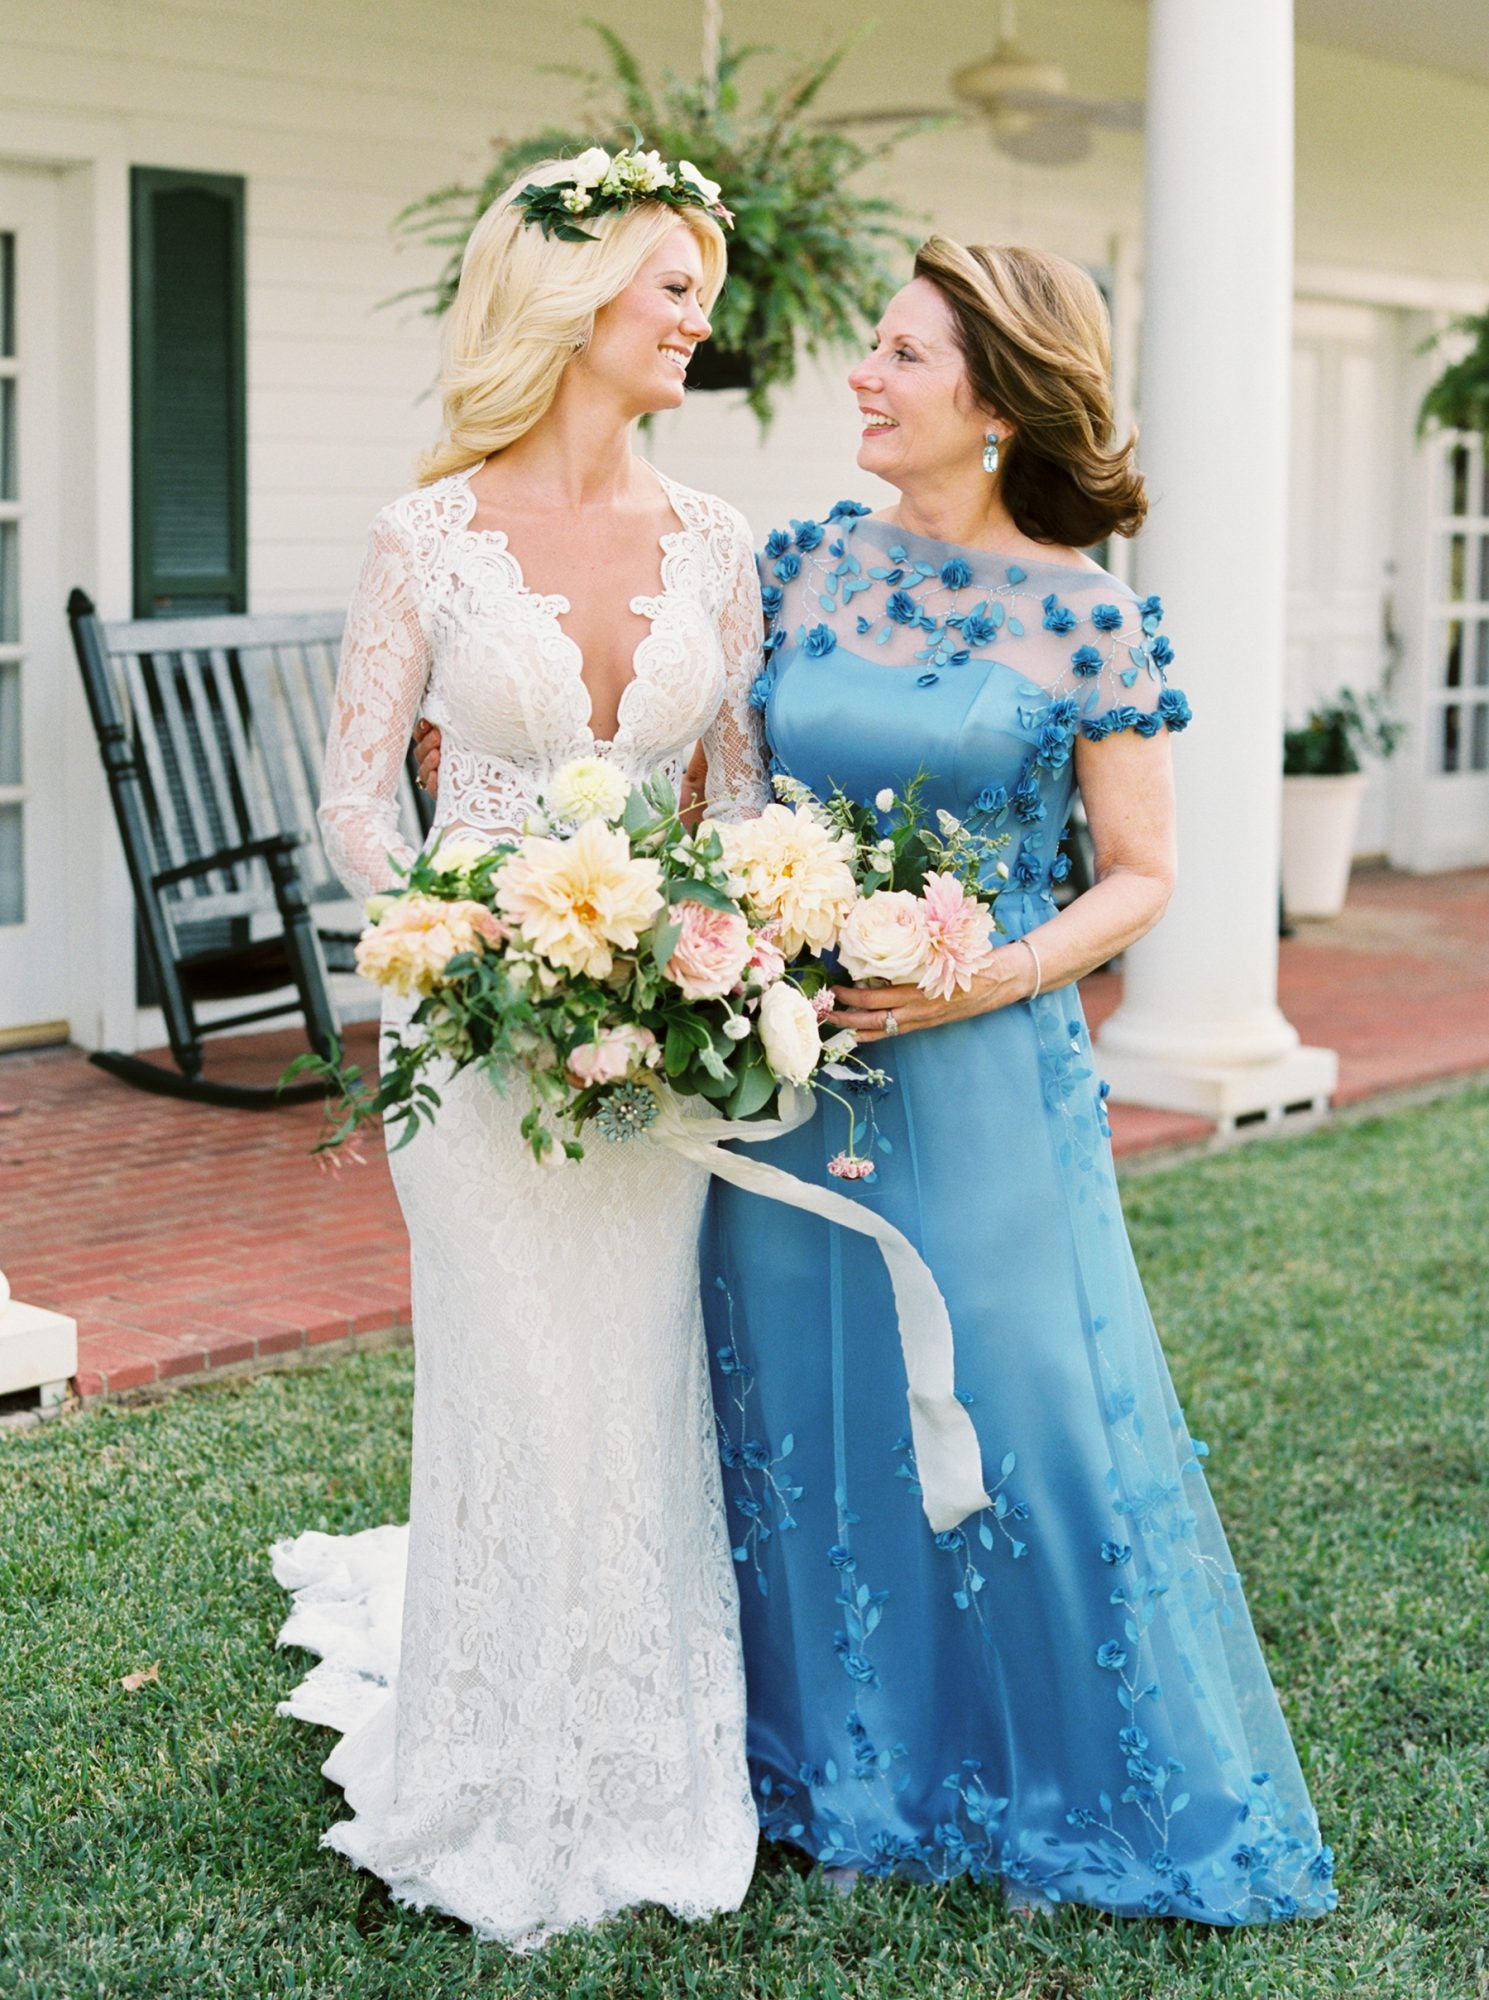 WHEN TO BUY A MOTHER OF THE BRIDE DRESS